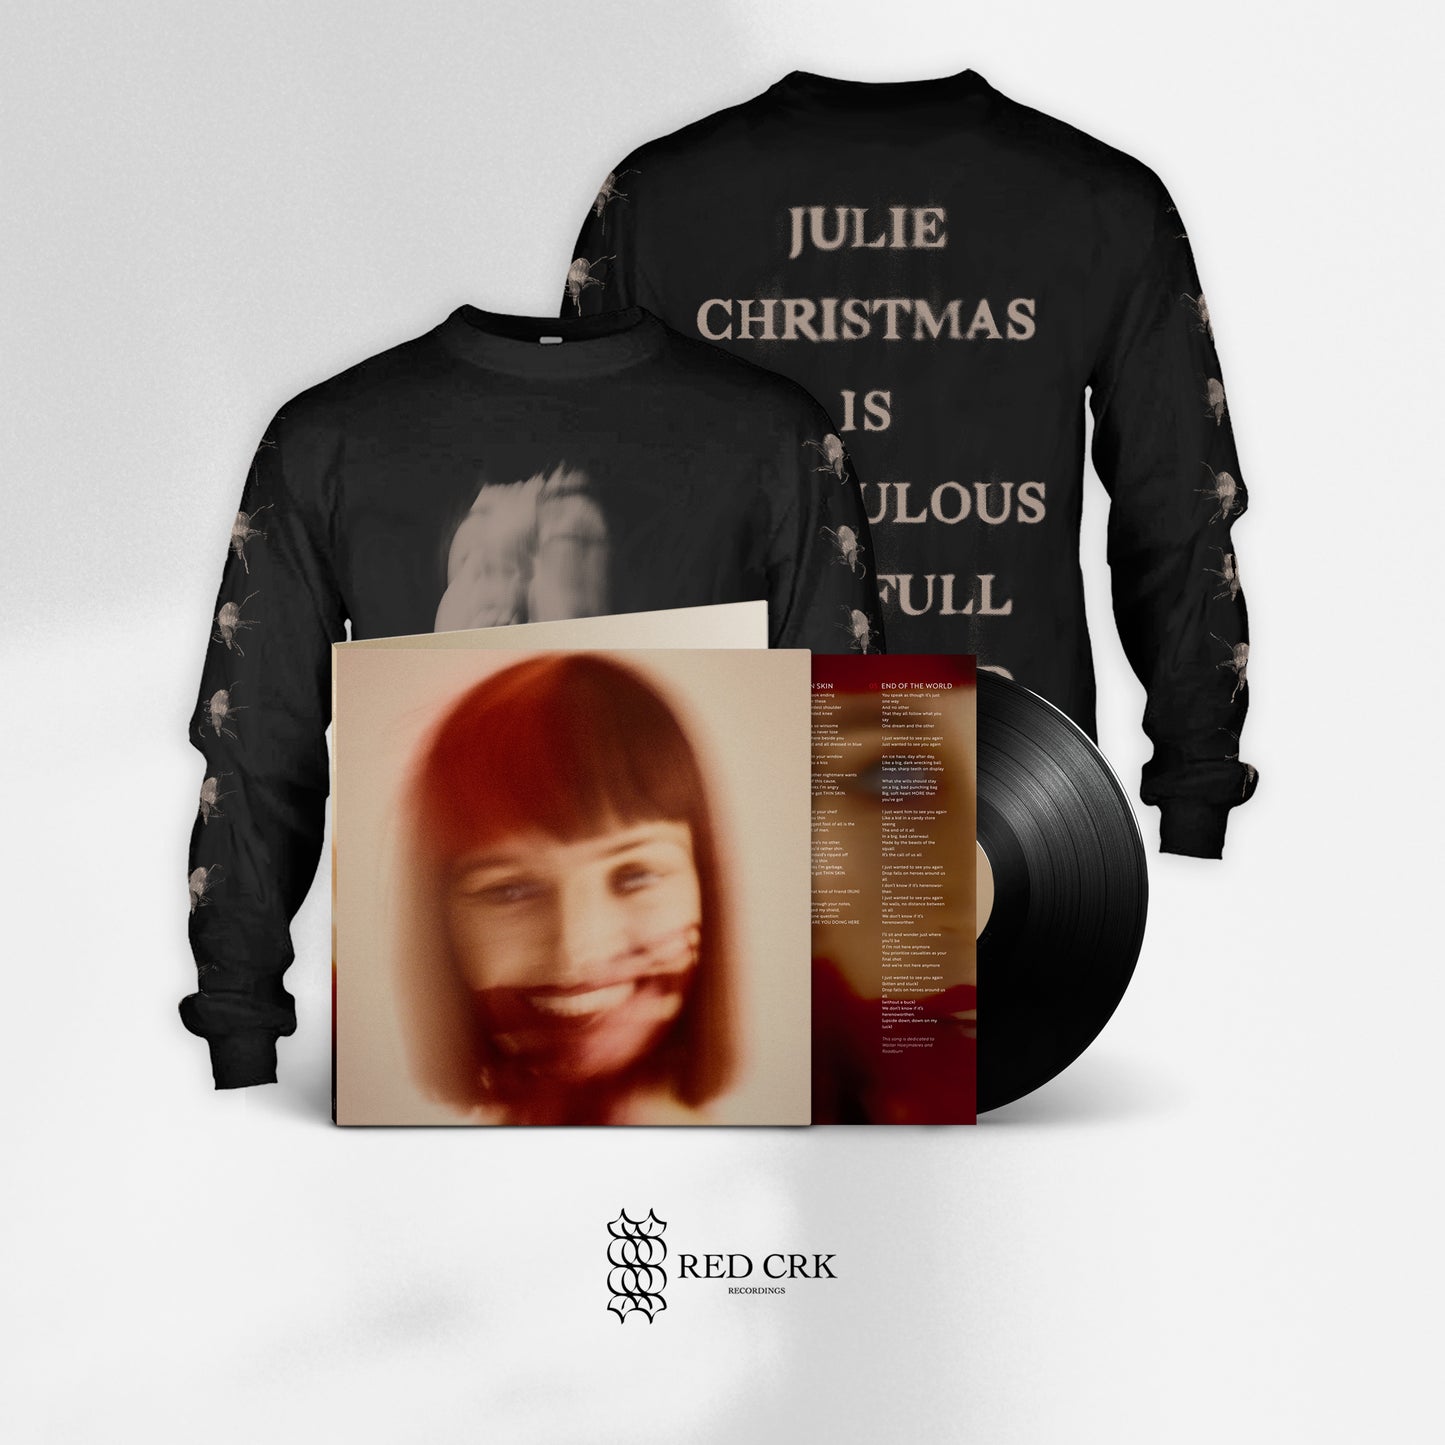 JULIE CHRISTMAS - Ridiculous And Full of Blood (LP) + Screaming (Long Sleeve) (Bundle)